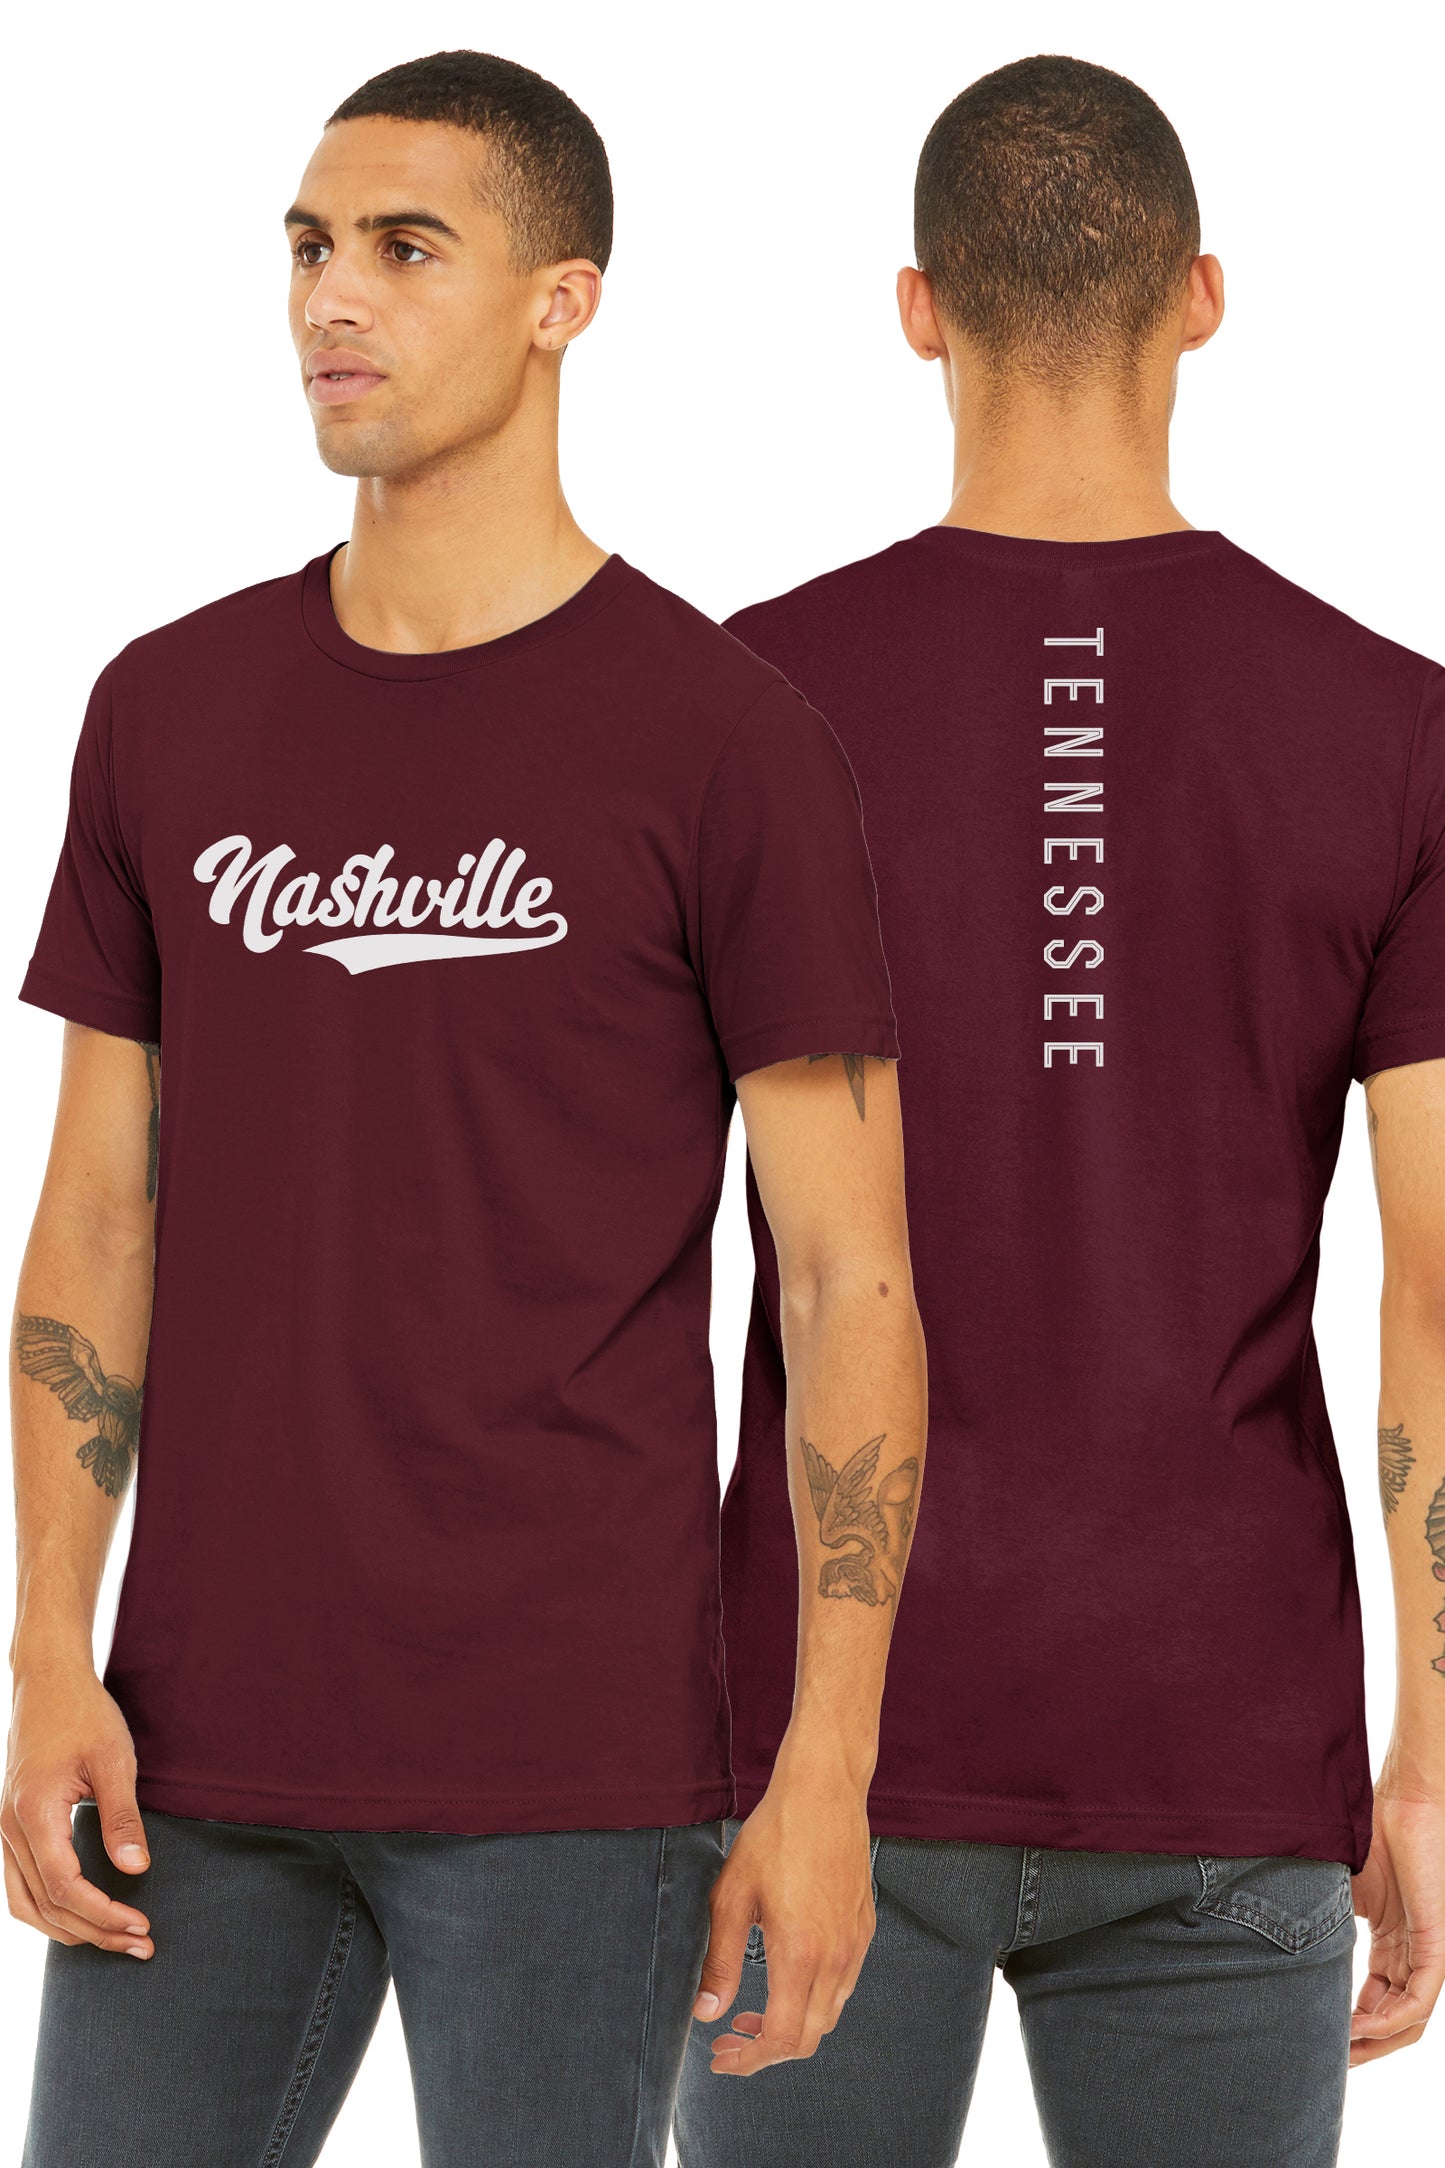 Daxton Adult Unisex Tshirt Nashville Script with Tennessee Vertical on the Back